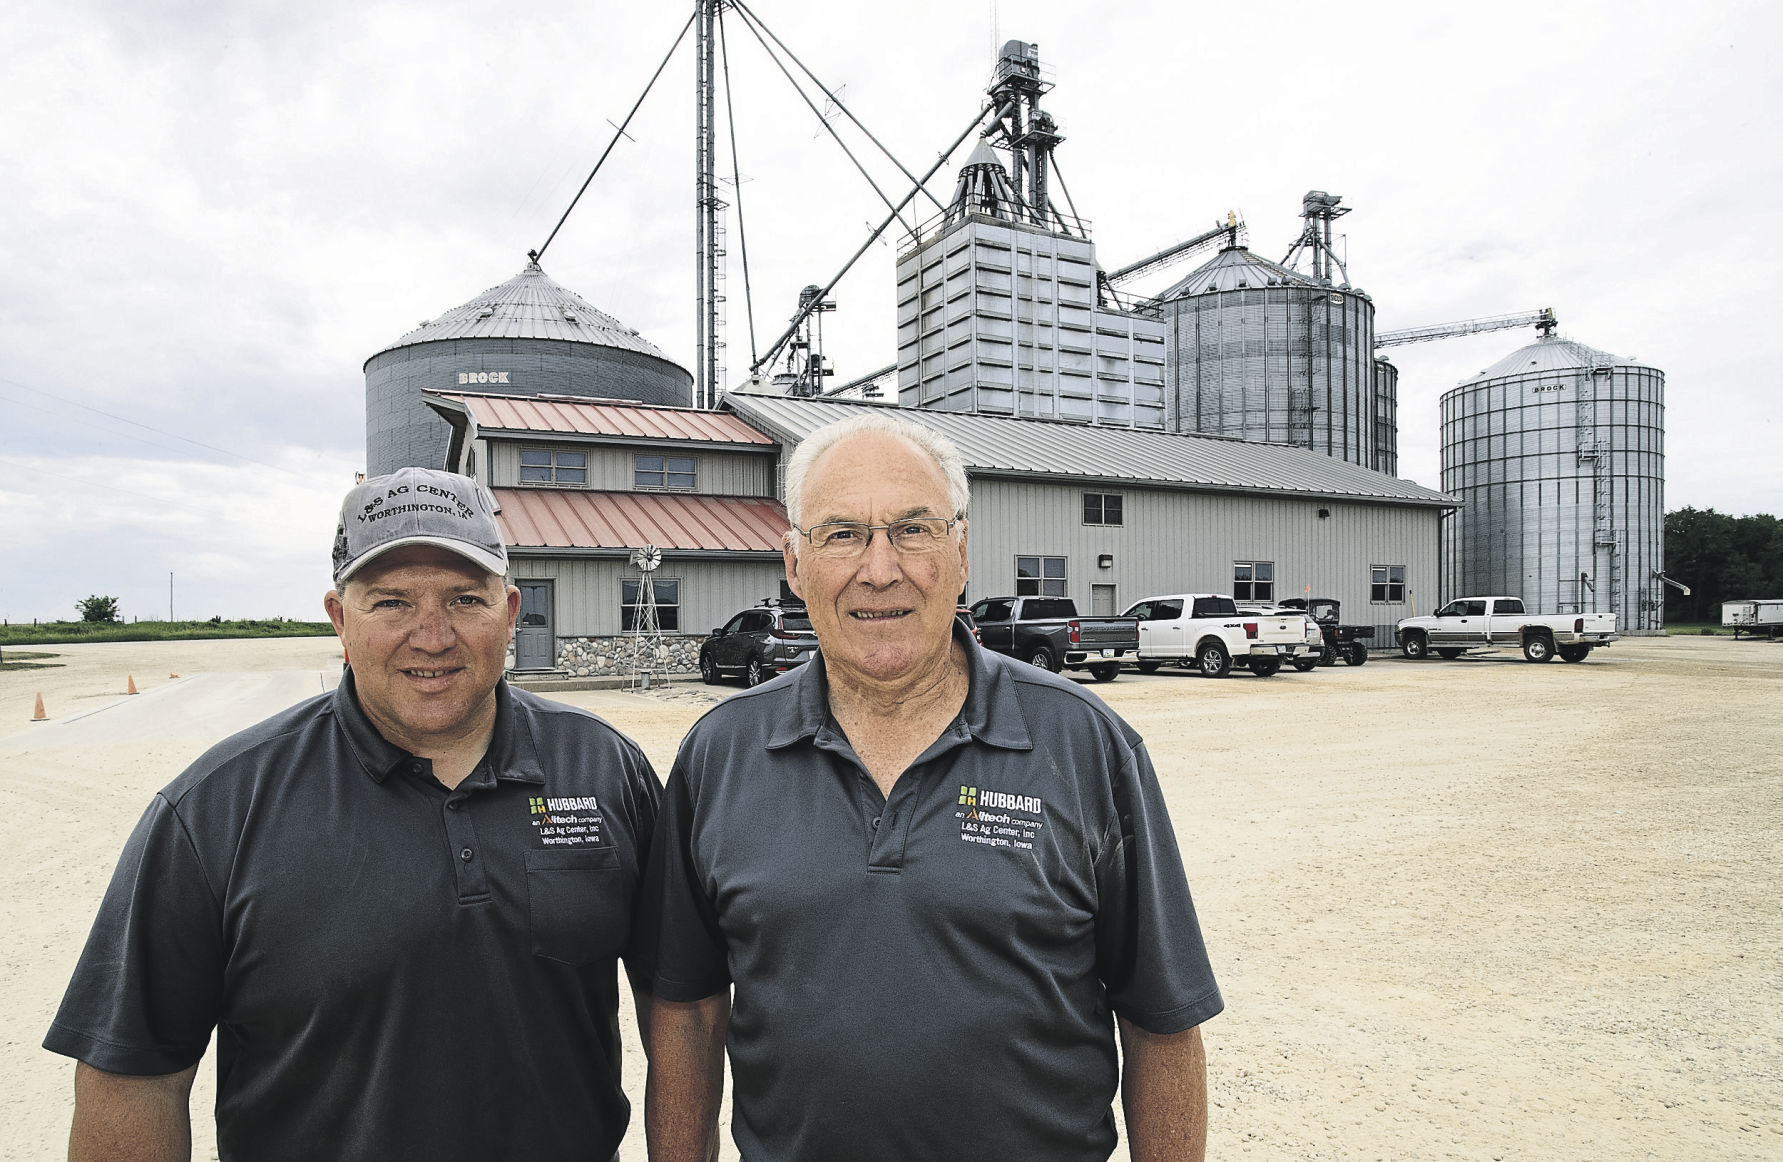 Jason and Loras Wolfe operate L&S Ag Center in Worthington, Iowa. It has a long history in the area, starting as a general merchandise store. Today it focuses on feed after adapting to changing agricultural business conditions.    PHOTO CREDIT: Stephen Gassman